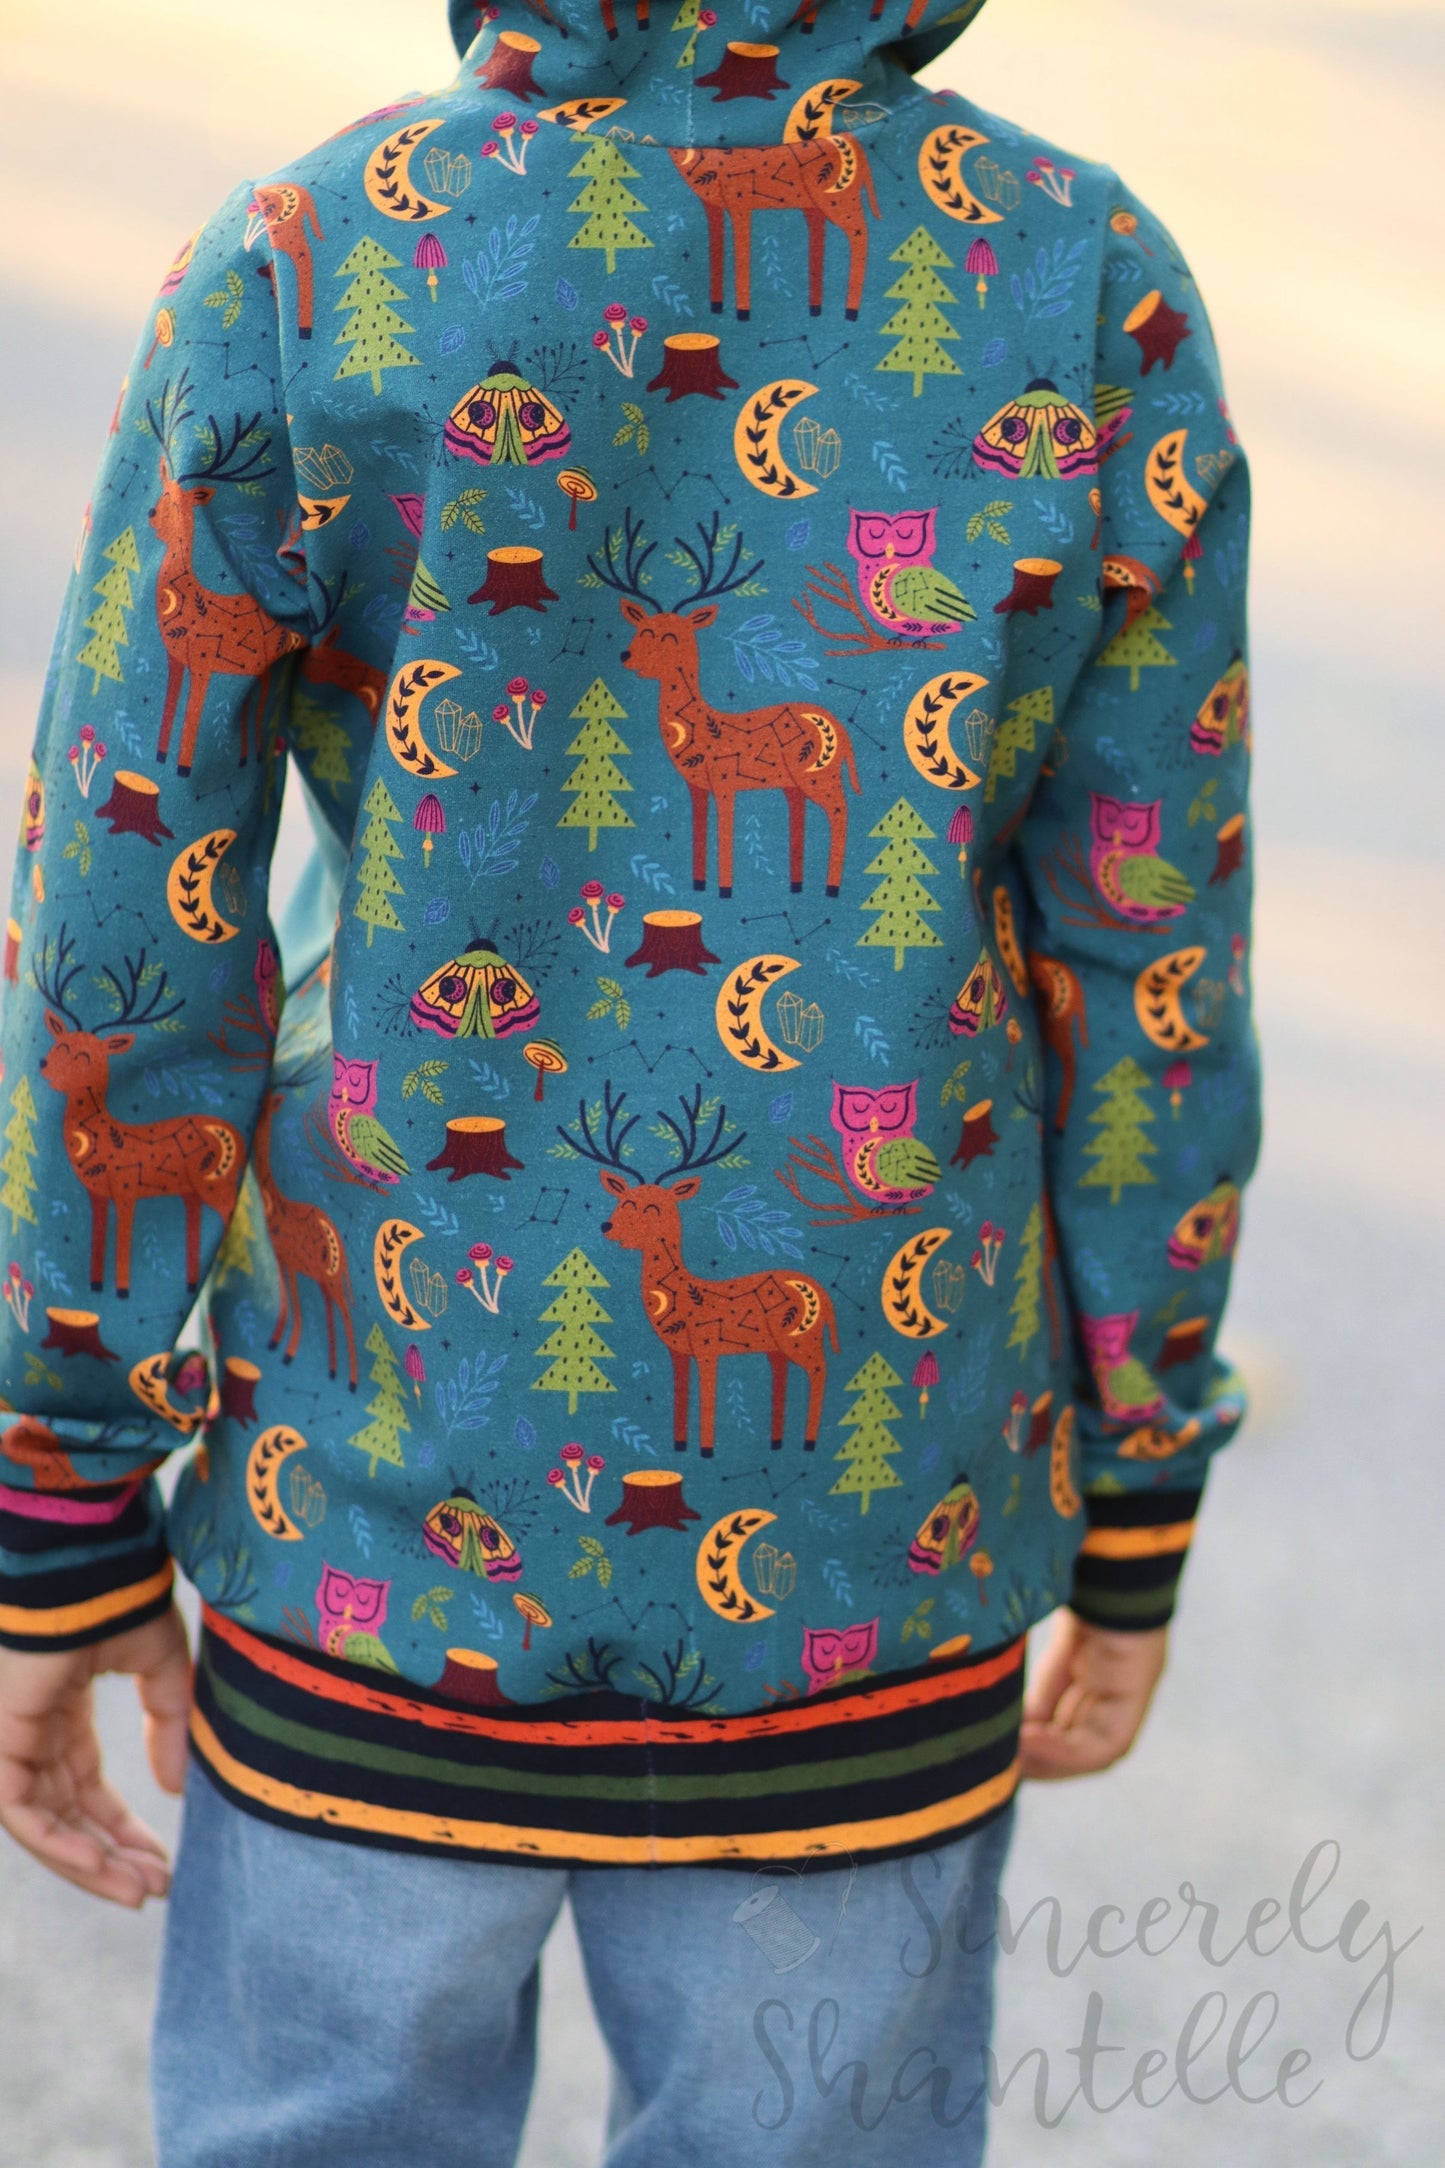 Poly Rib Knit - Round OO - Skulls & Shrooms, Magical Forest, New Wilderness & Hedgies - Fabric retail